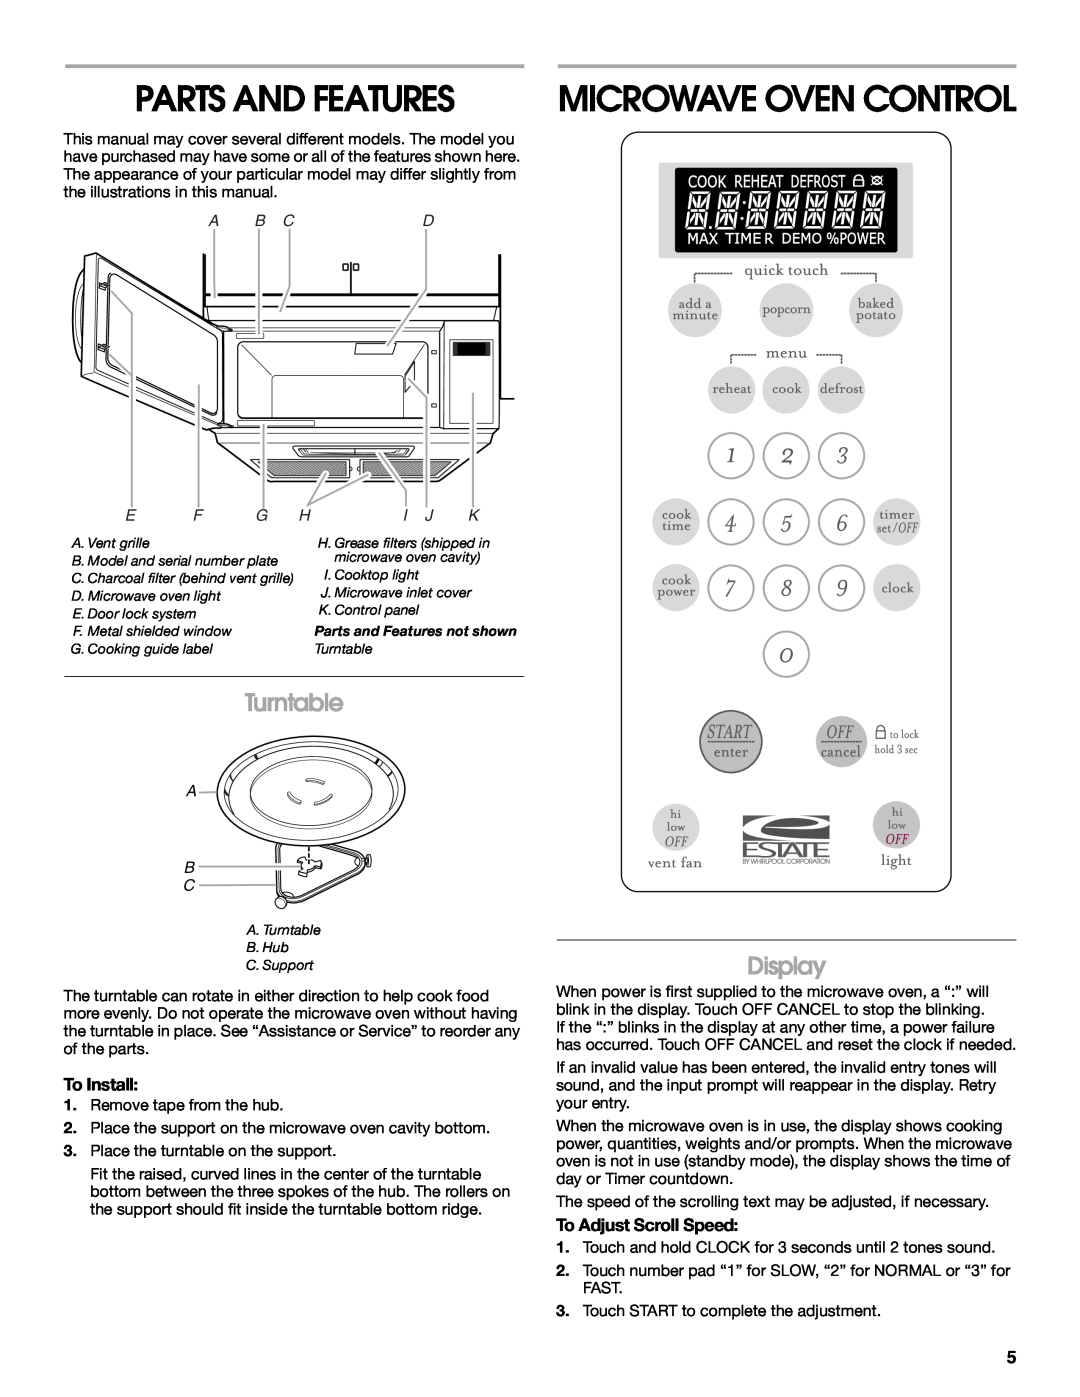 Estate TMH16XS Parts And Features, Turntable, Display, To Install, To Adjust Scroll Speed, A B C, Microwave Oven Control 